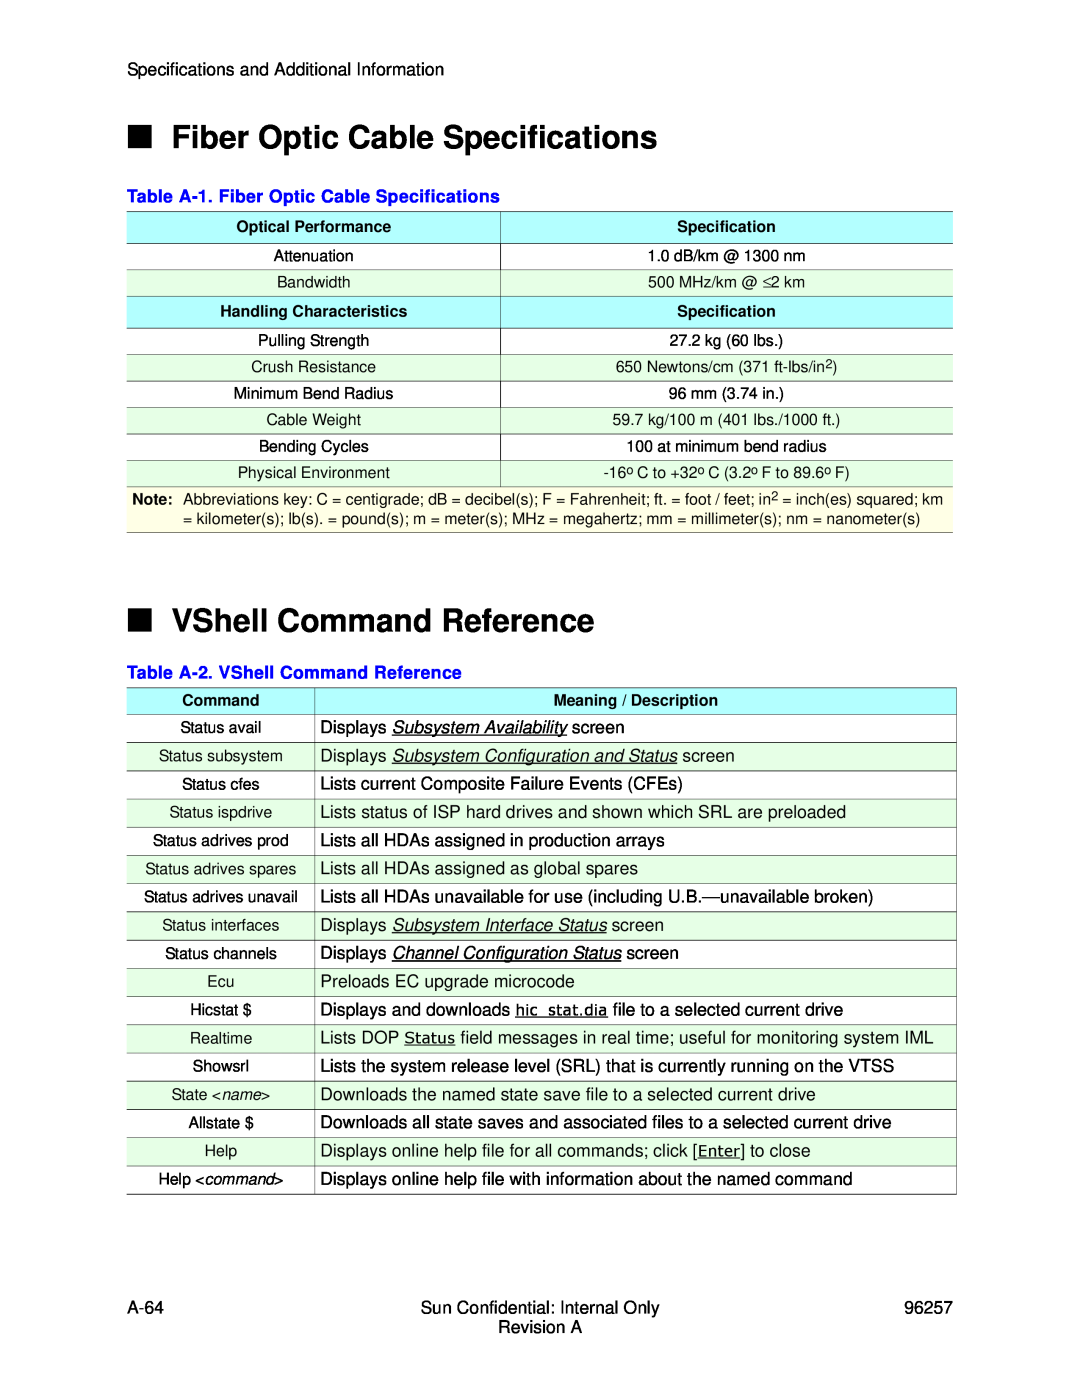 Sun Microsystems 96257 manual Fiber Optic Cable Specifications, Table A-2. VShell Command Reference 